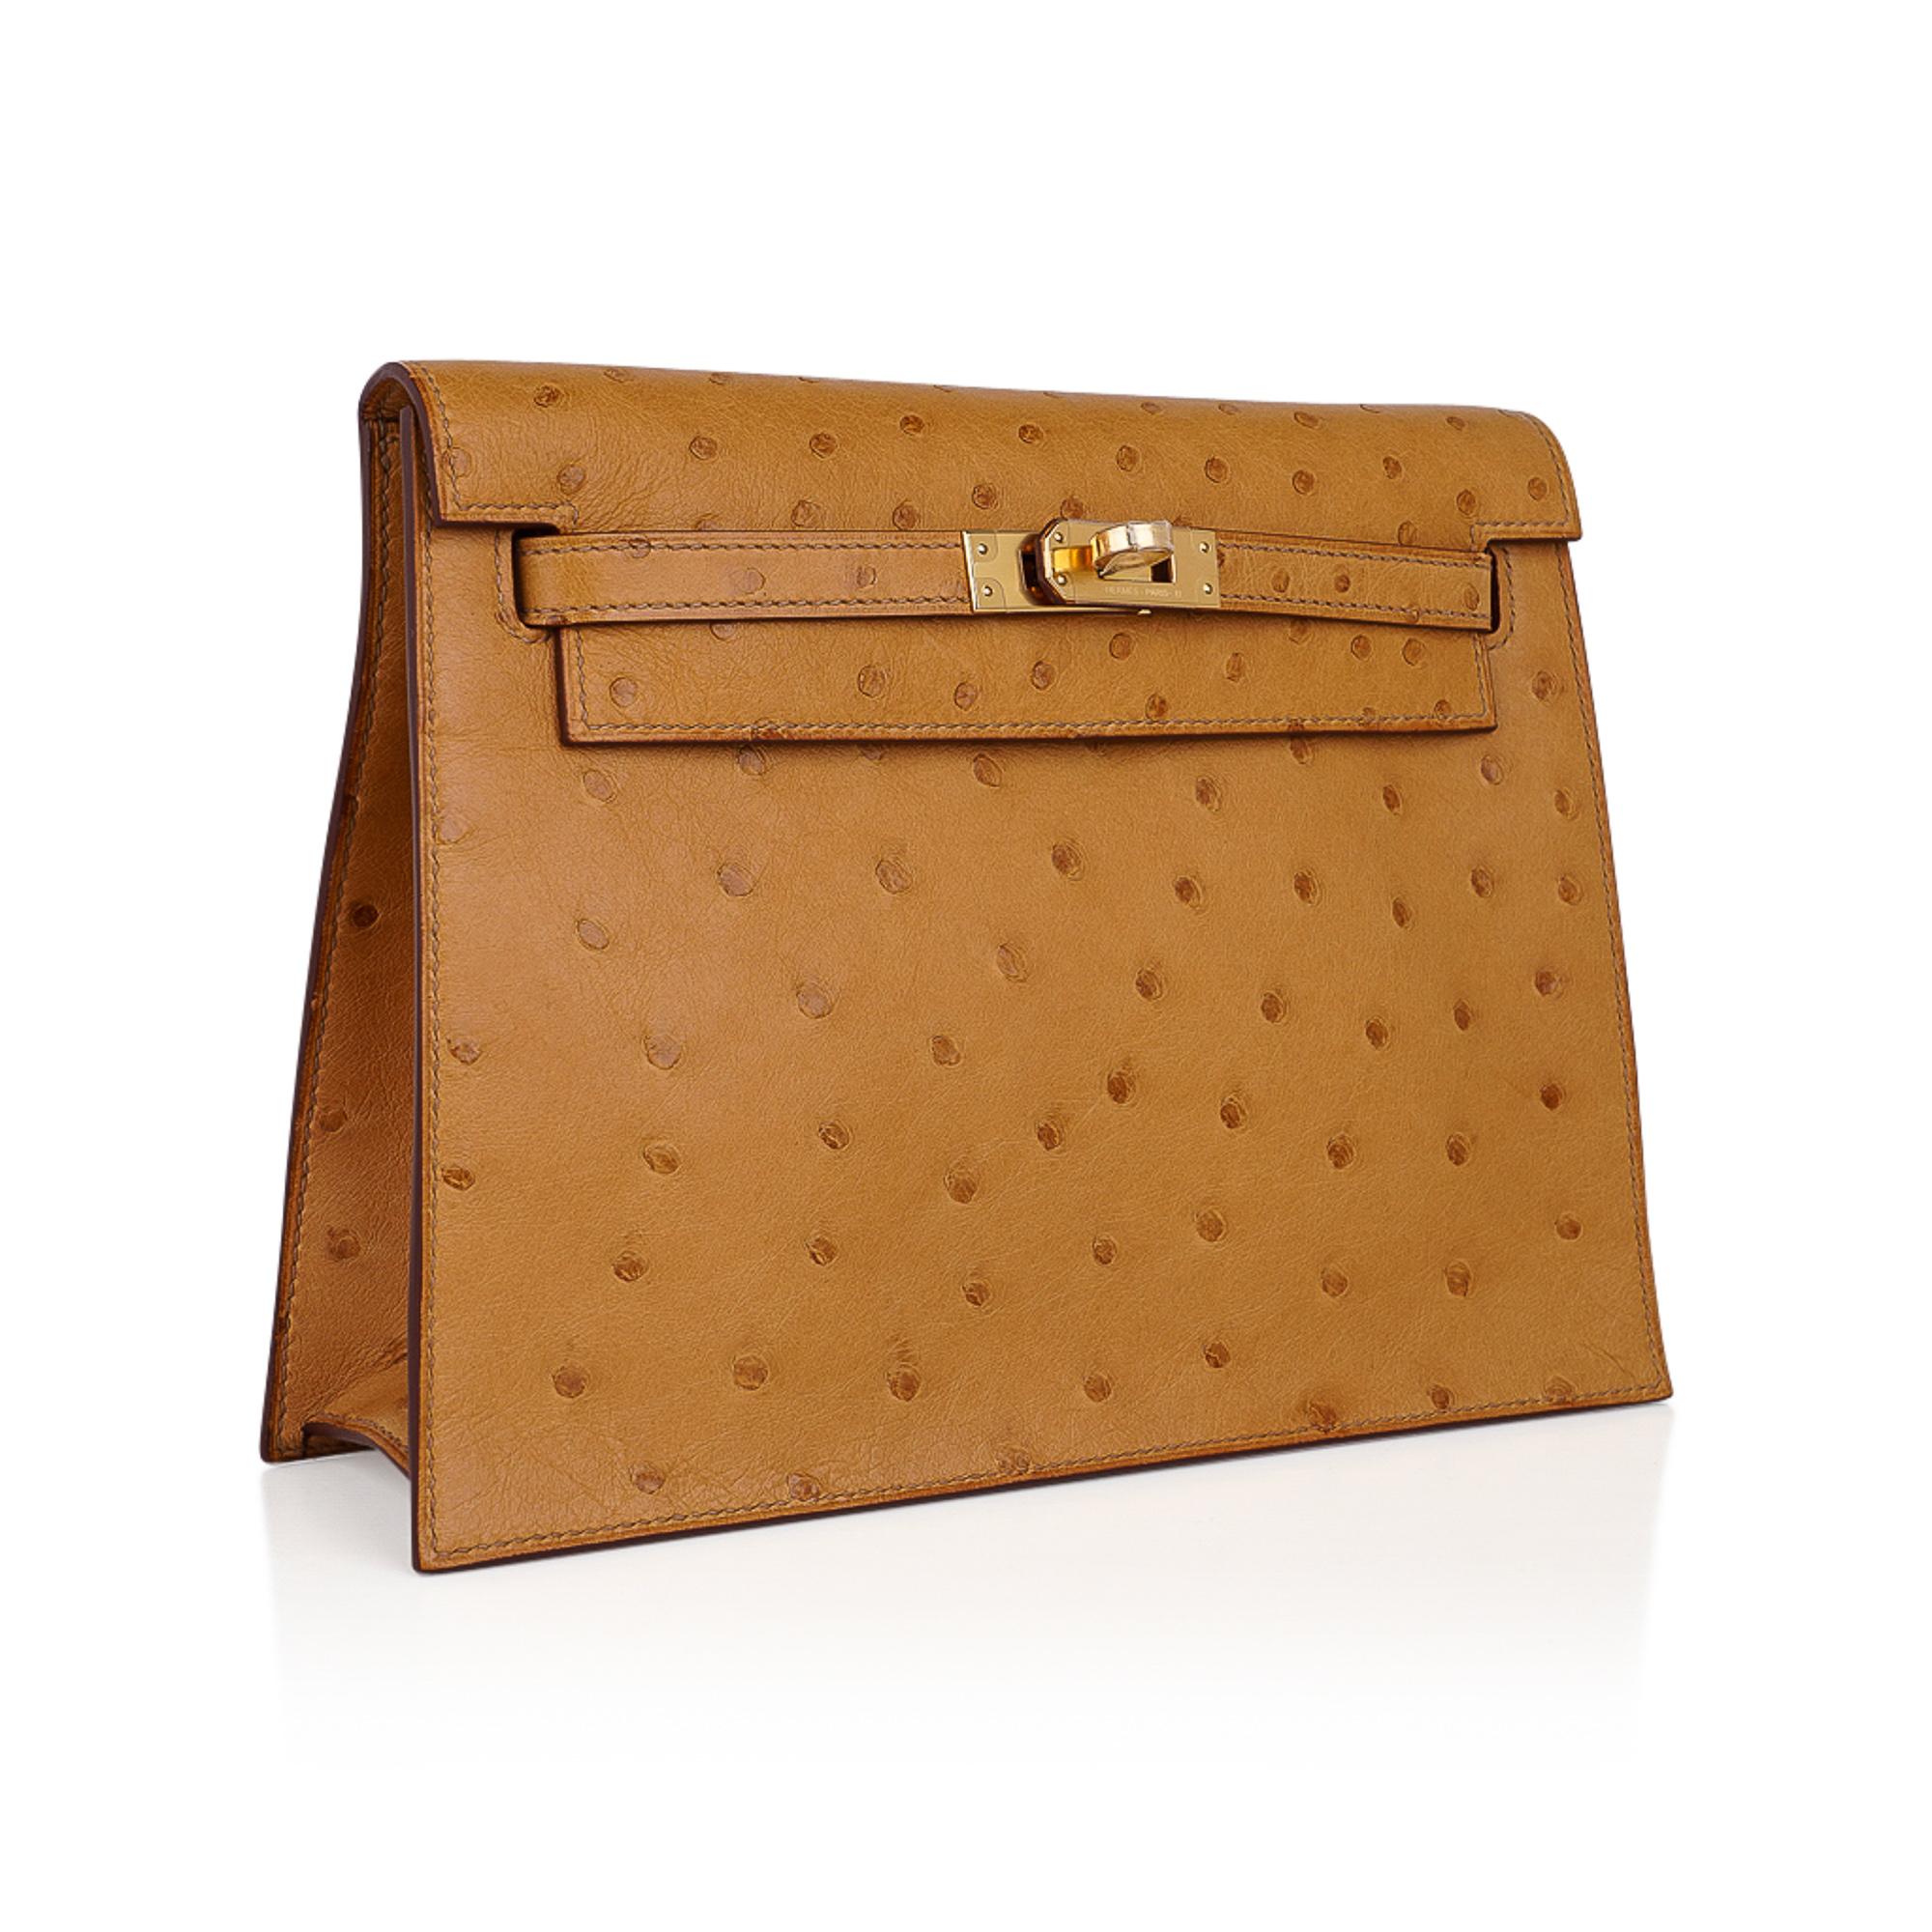 Mightychic offers an Hermes Kelly Danse featured in warm Tabac Camel Ostrich.
This fabulous, versatile bag can be worn as a backpack, shoulder, crossbody or waist bag.
Lush with Gold Hardware.
Comes with sleeper and signature Hermes box
NEW or NEVER